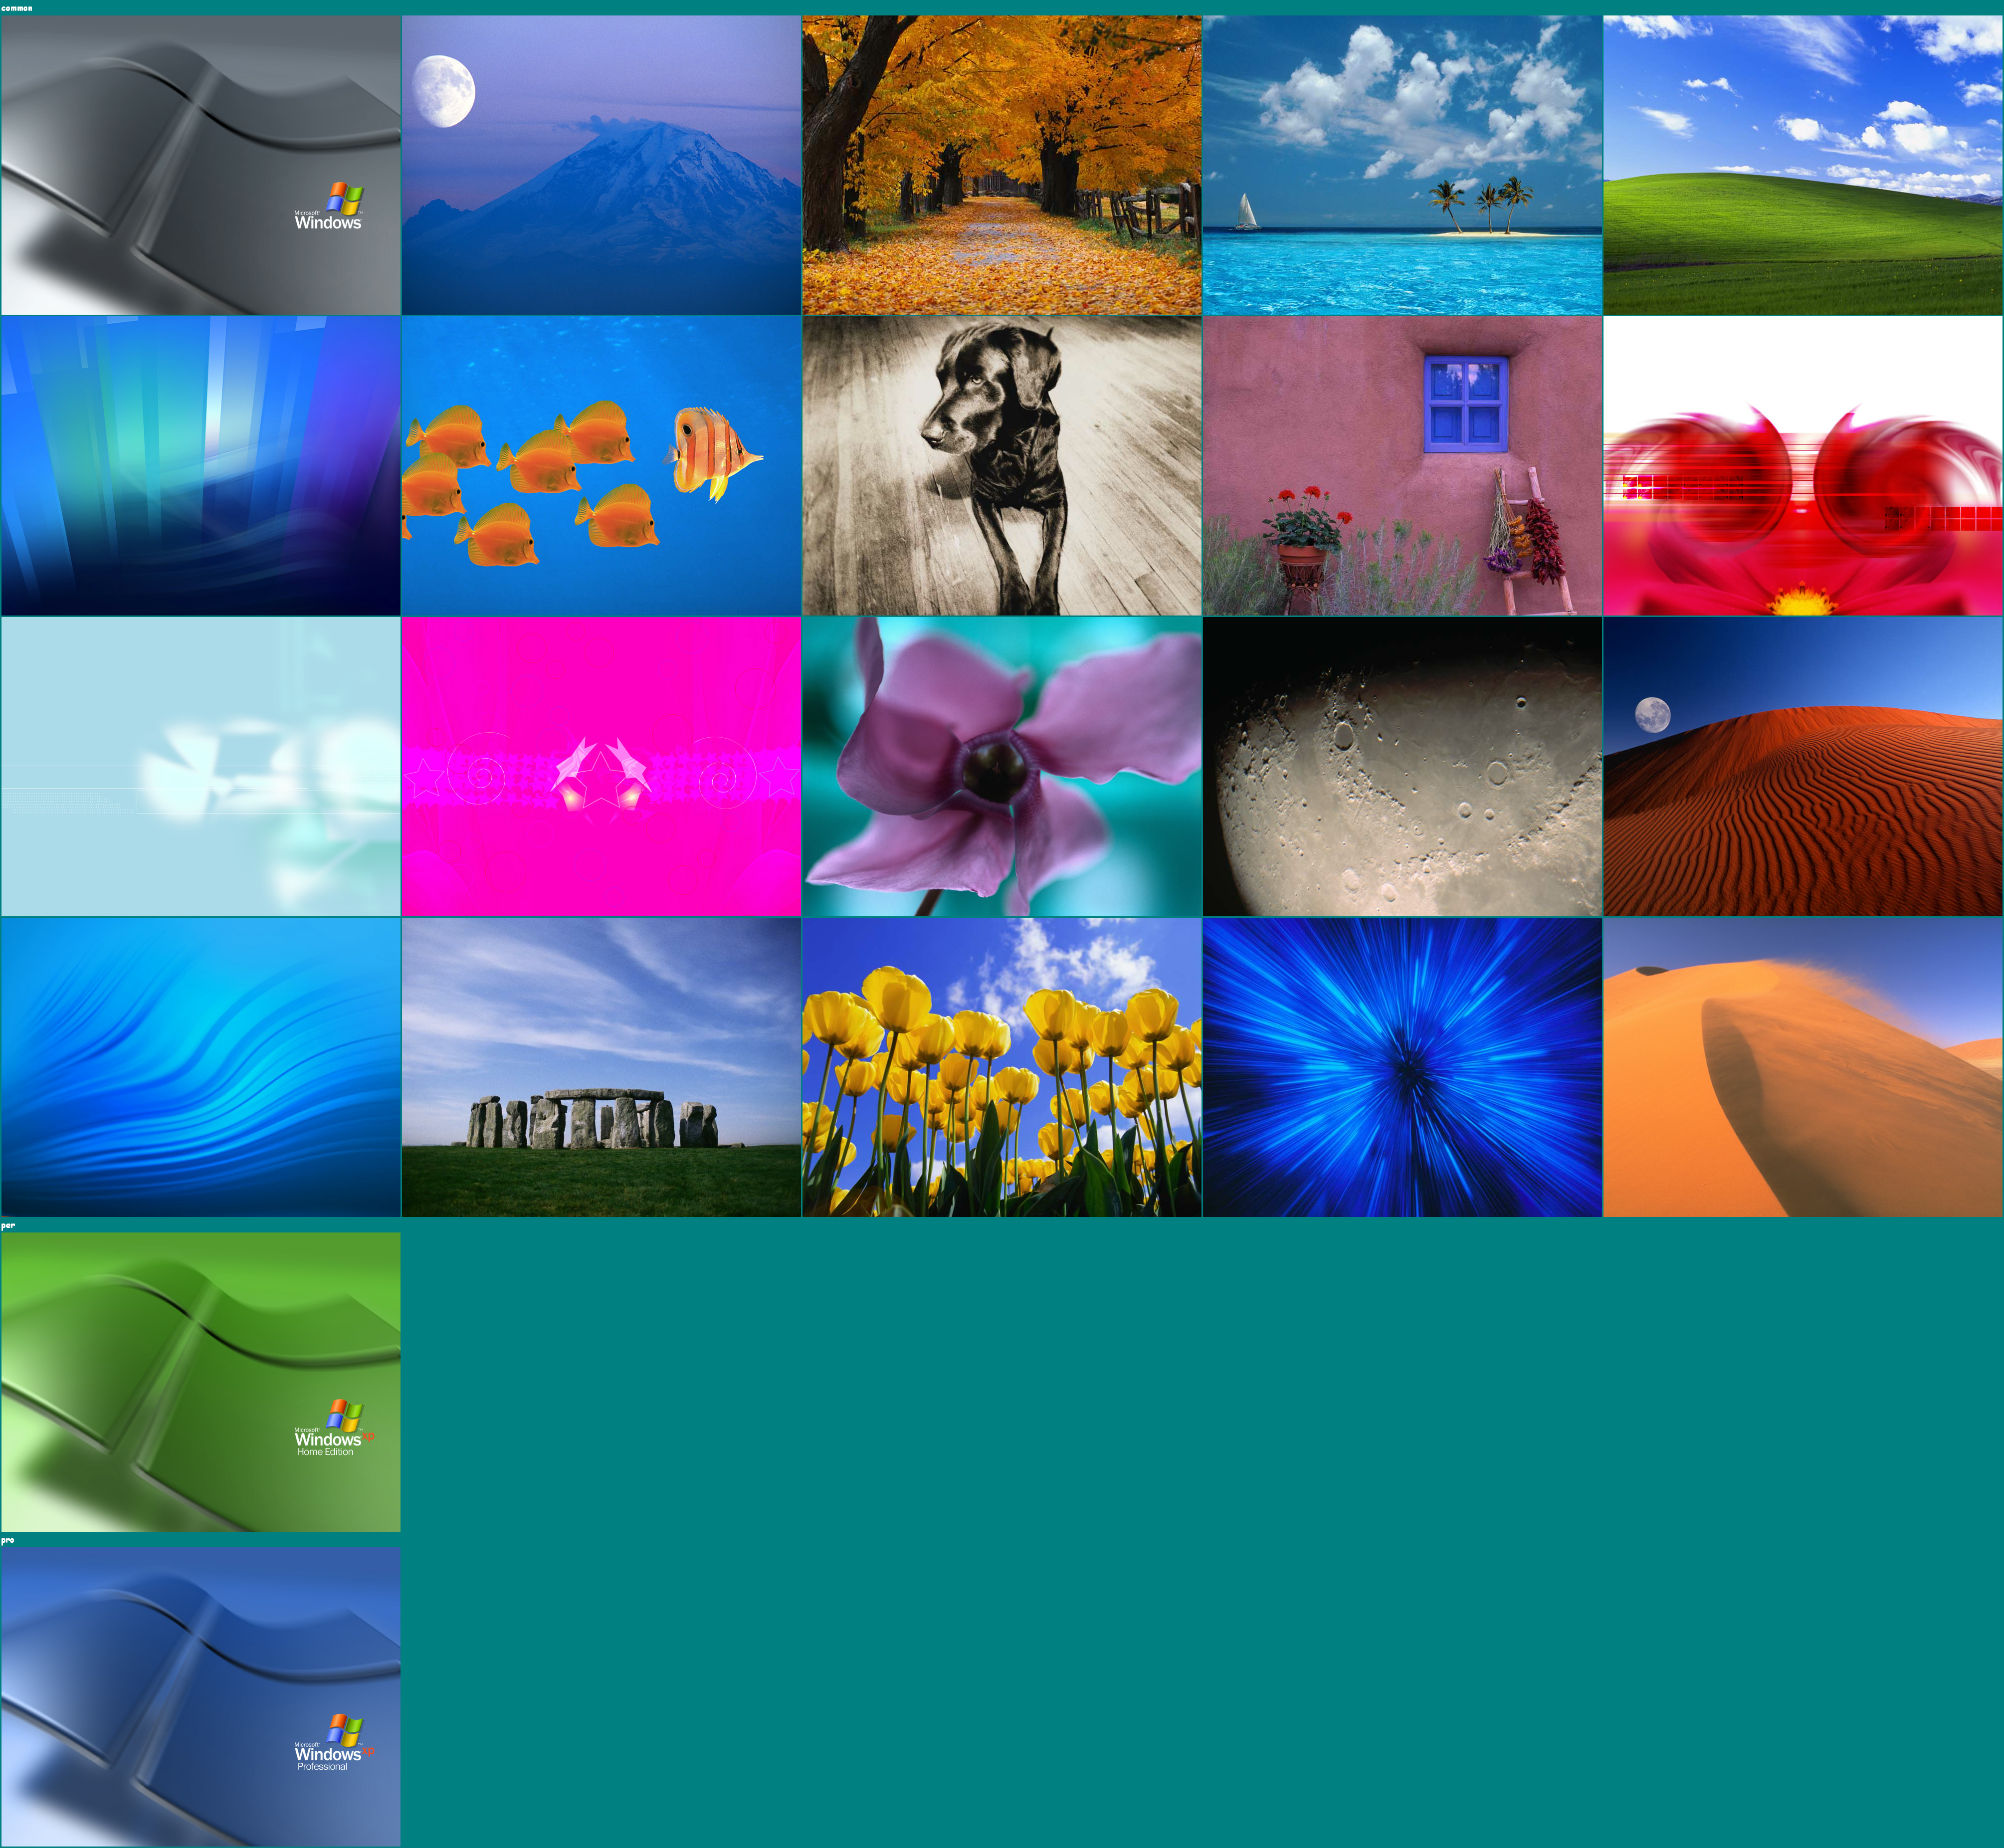 Windows XP Built-In Applications - Wallpapers